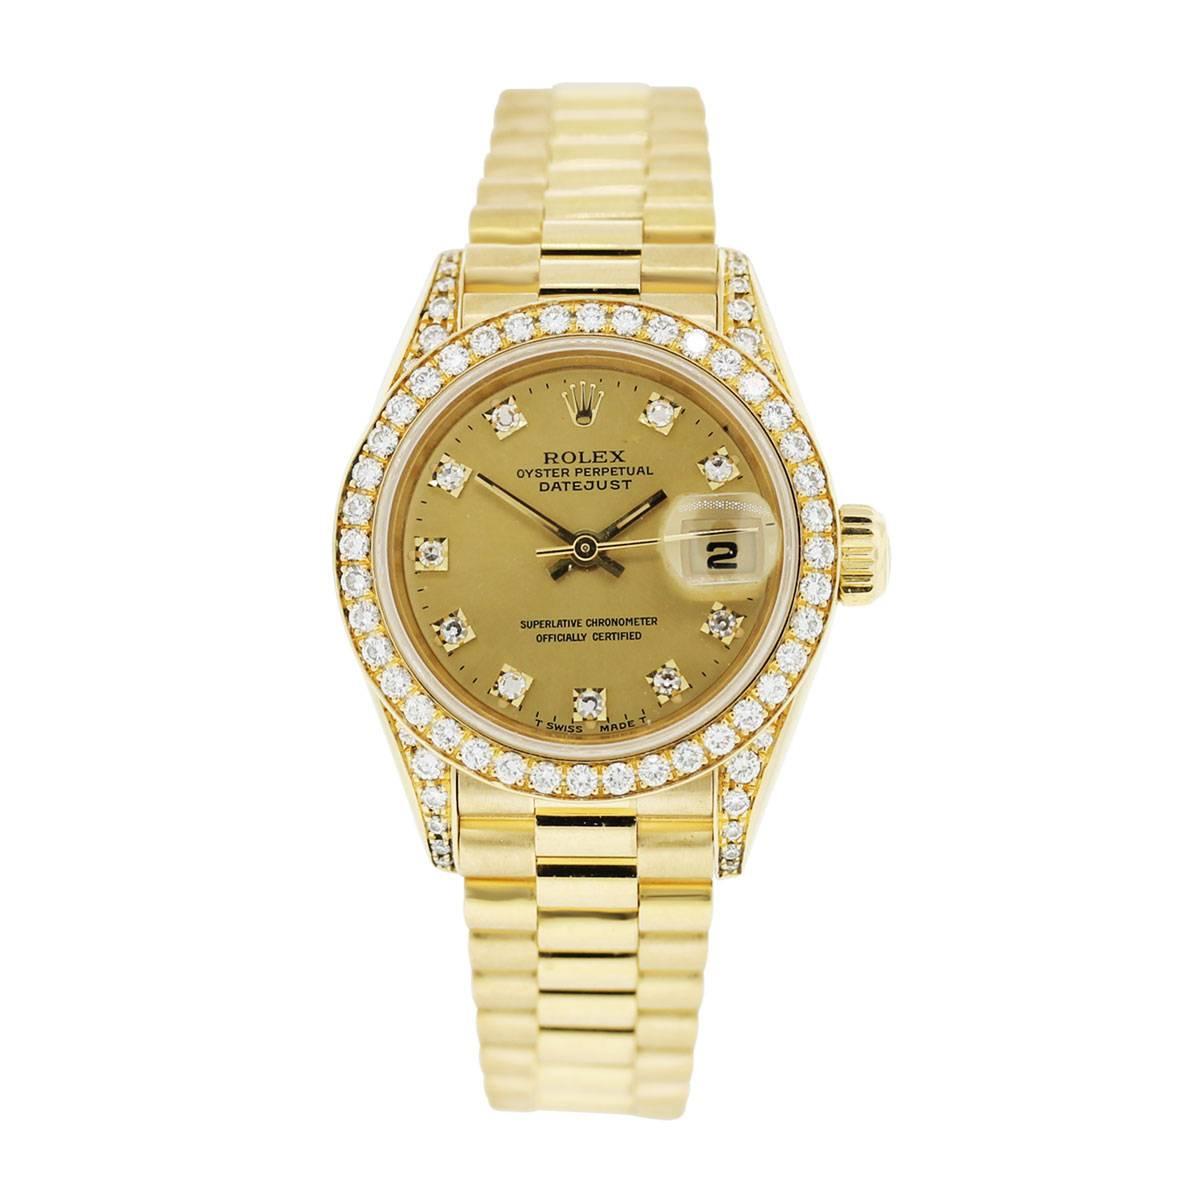 Brand: Rolex
Model: Datejust
Reference Number: 69158
Serial: S
Material: 18k Yellow Gold
Dial: Gold Dial with 10 Round Brilliant Diamond Dial Markers, Date at 3 o'clock (factory original)
Diamond details: Fixed bezel , 18k Yellow Gold Bezel with